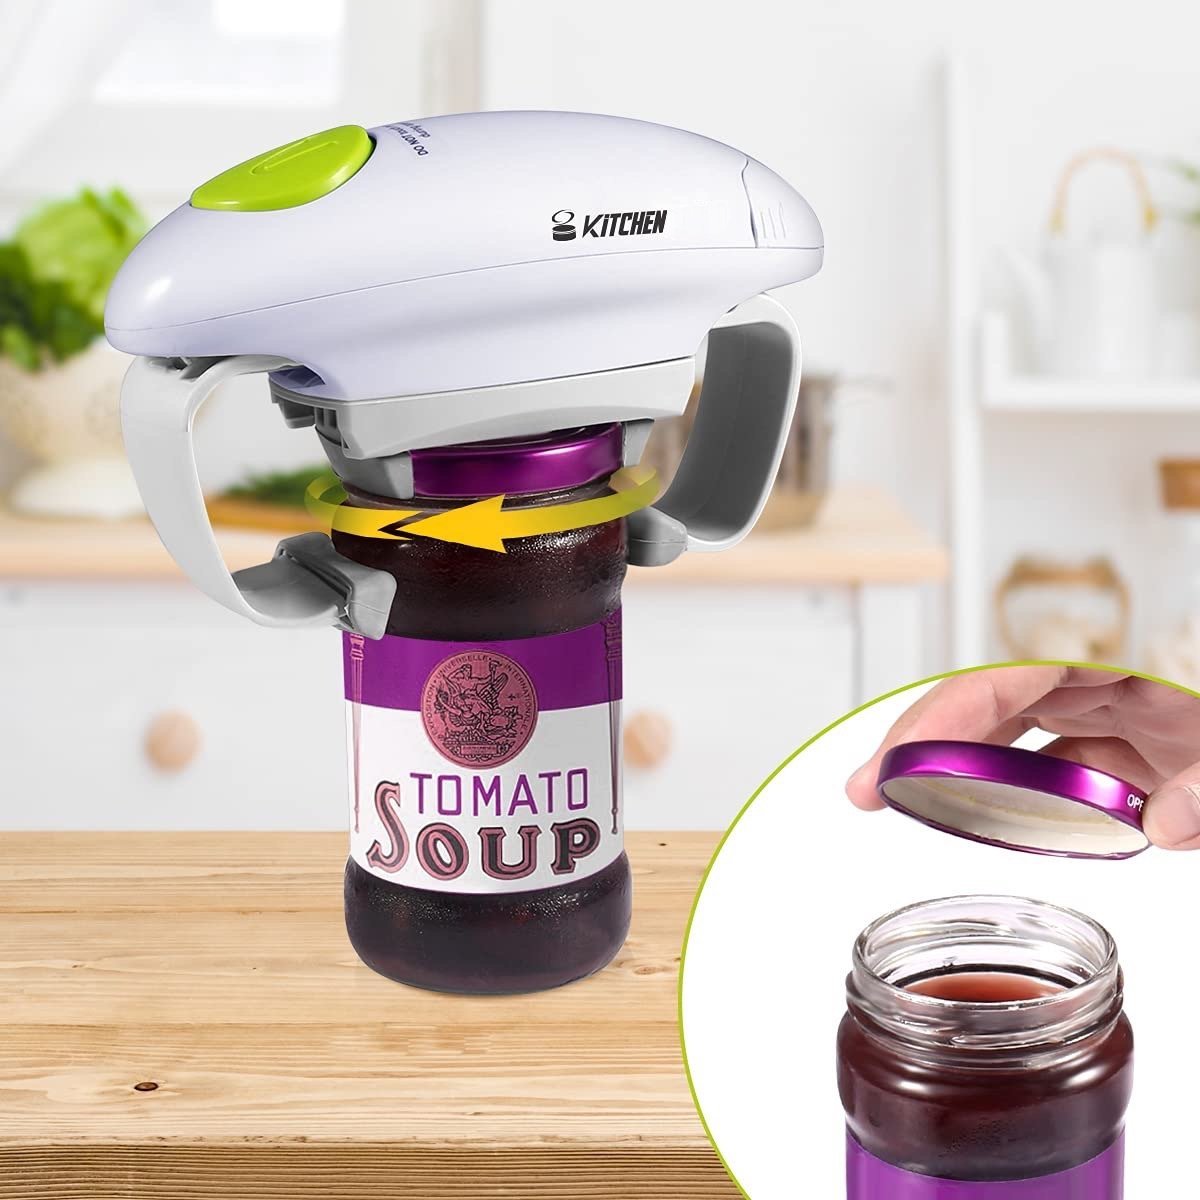 Electric Jar Opener,one Touch Automatic Jar Opener, Bottle Opener